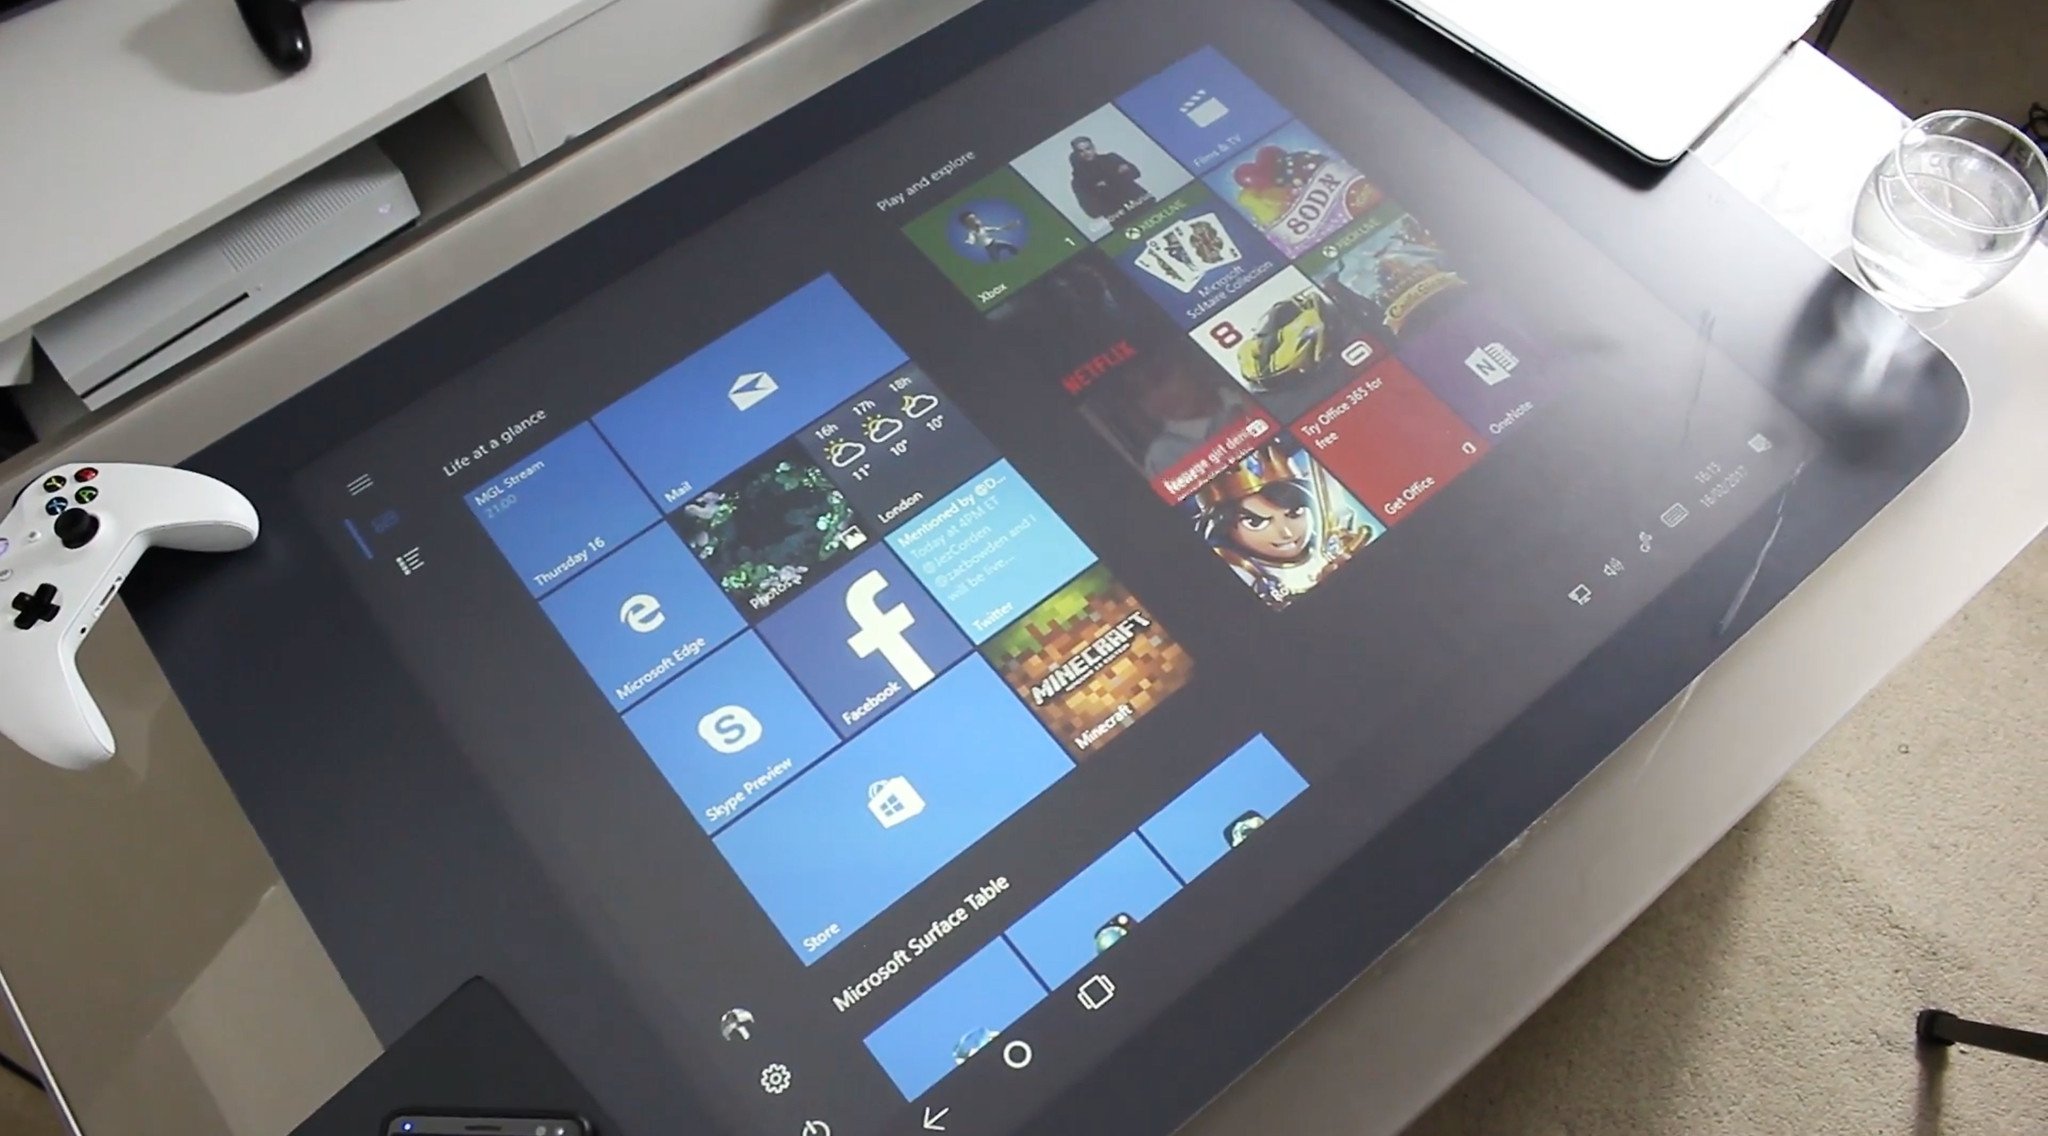 Windows 10 On The Surface Coffee Table, Smart Coffee Table Tablet